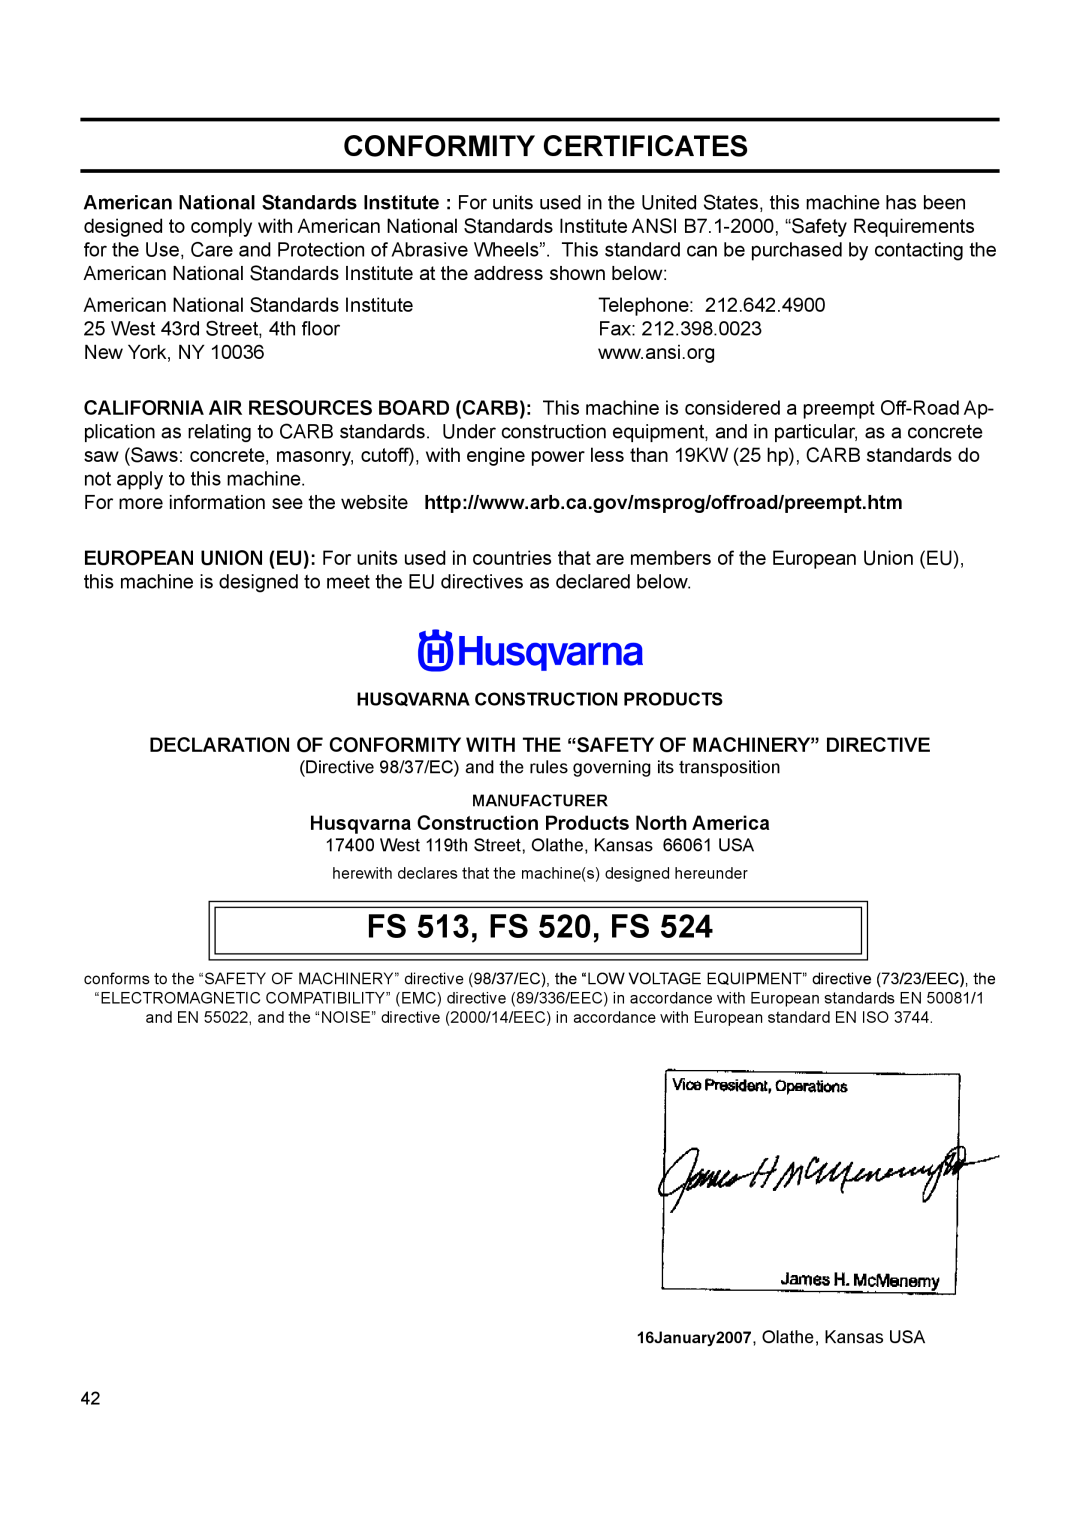 Husqvarna FS 524, FS 513 Conformity Certificates, Declaration Of Conformity With The “Safety Of Machinery” Directive 